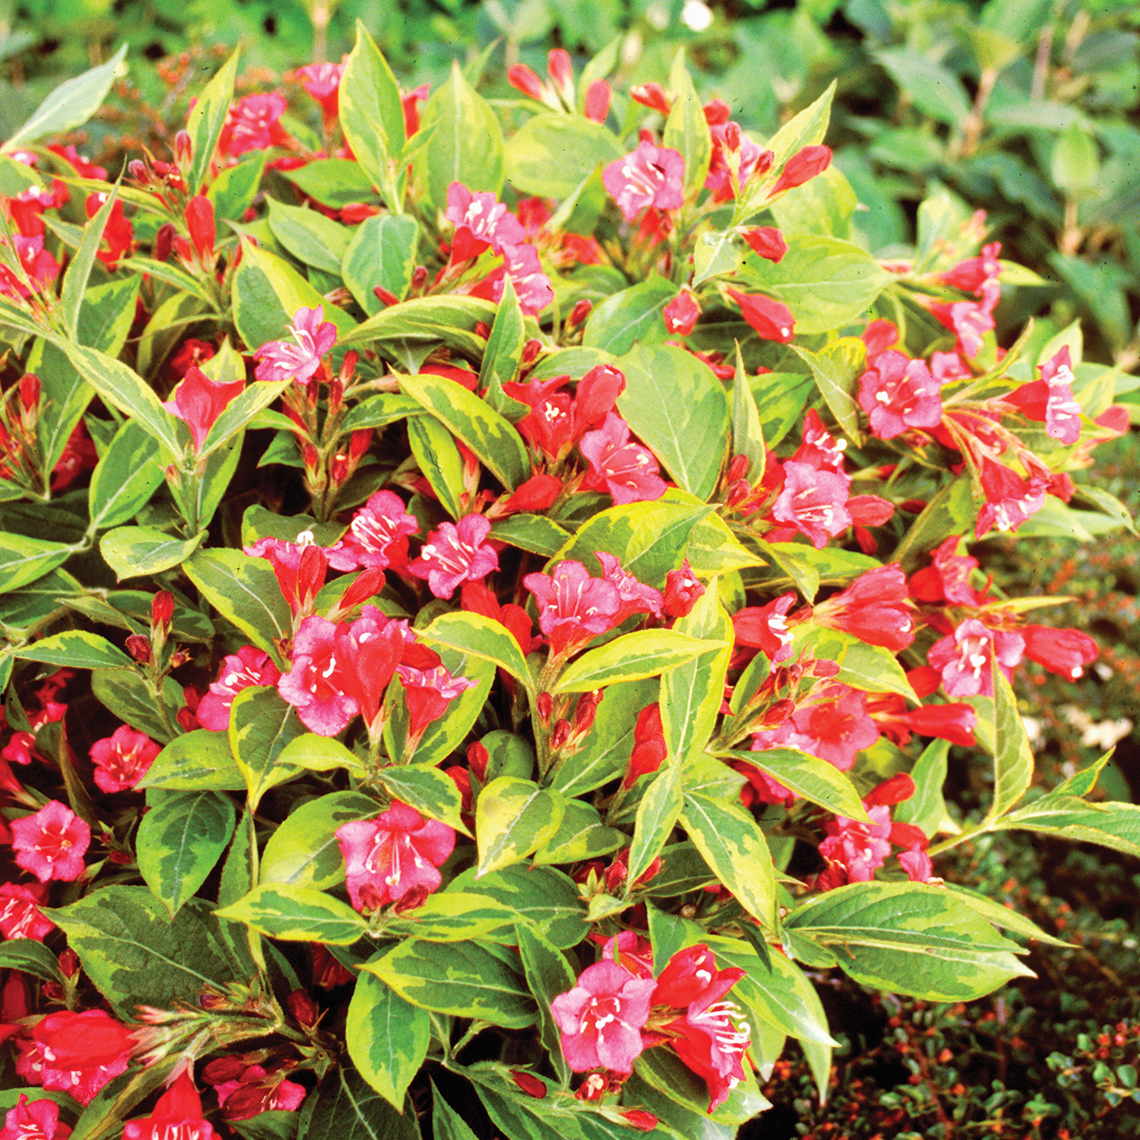 French Lace weigela has variegated green and gold foliage and bright pink trumpet like flowers